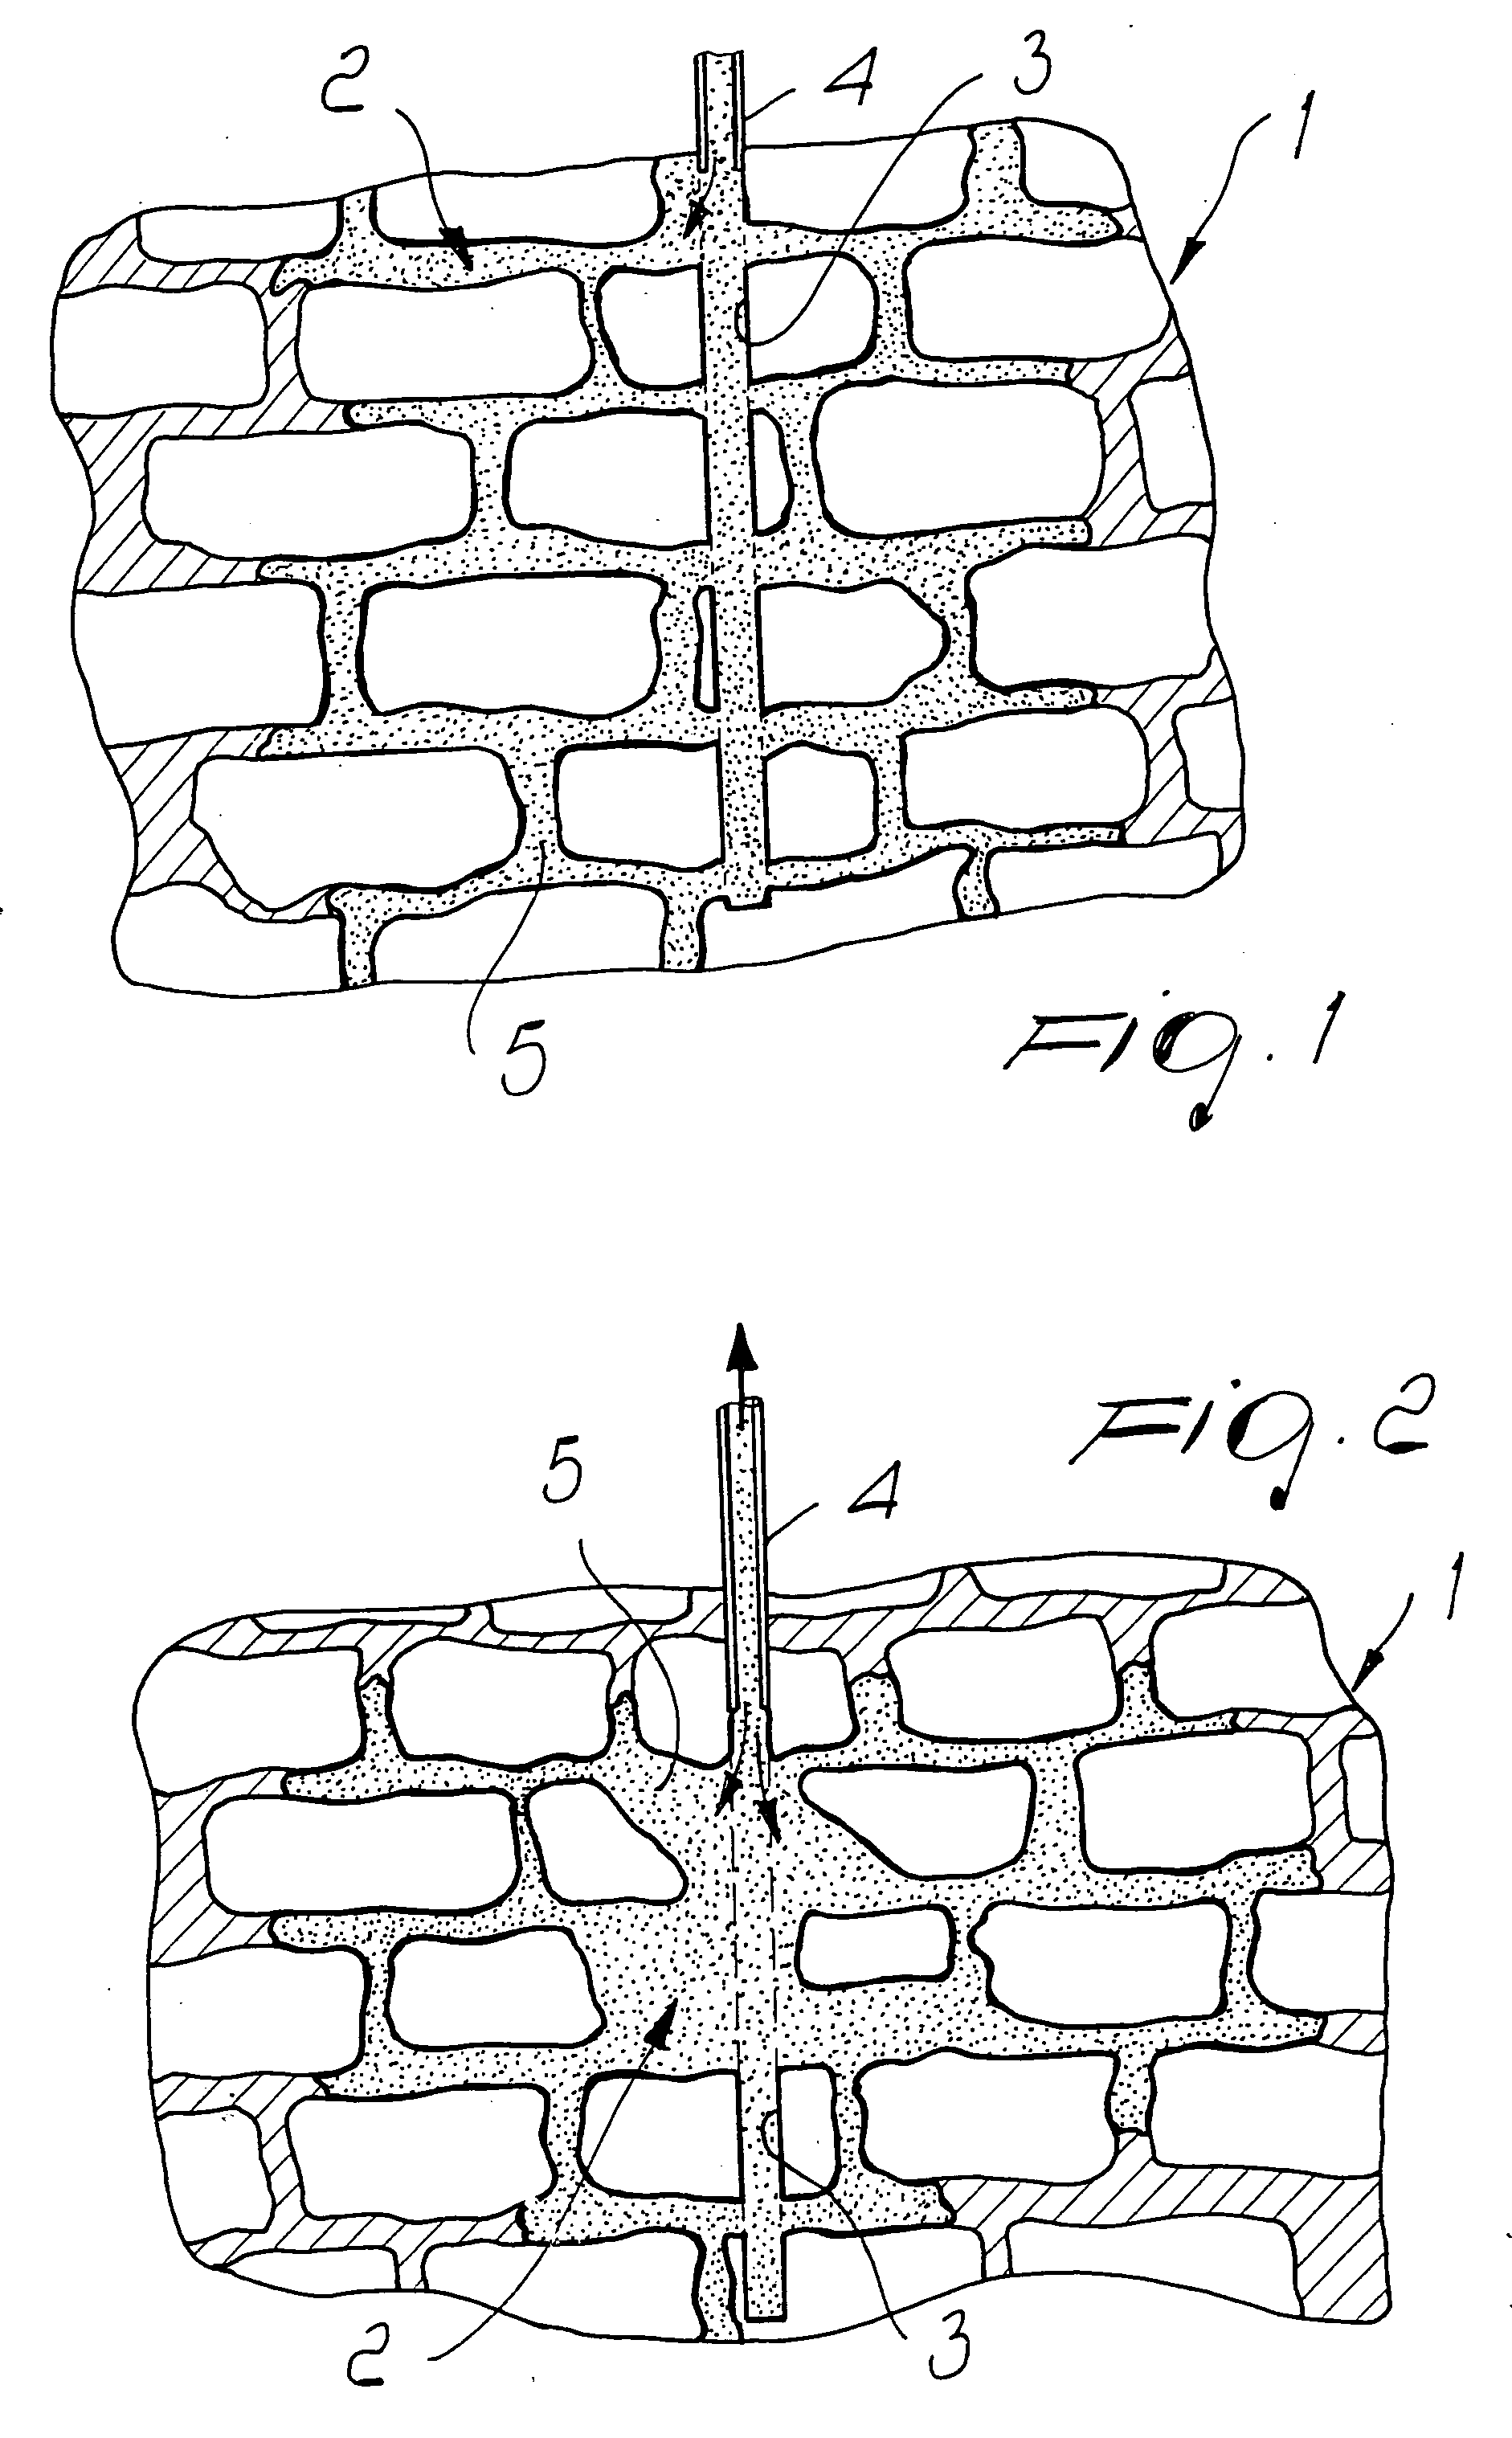 Method for repairing, waterproofing, insulating, reinforcing, restoring of wall systems